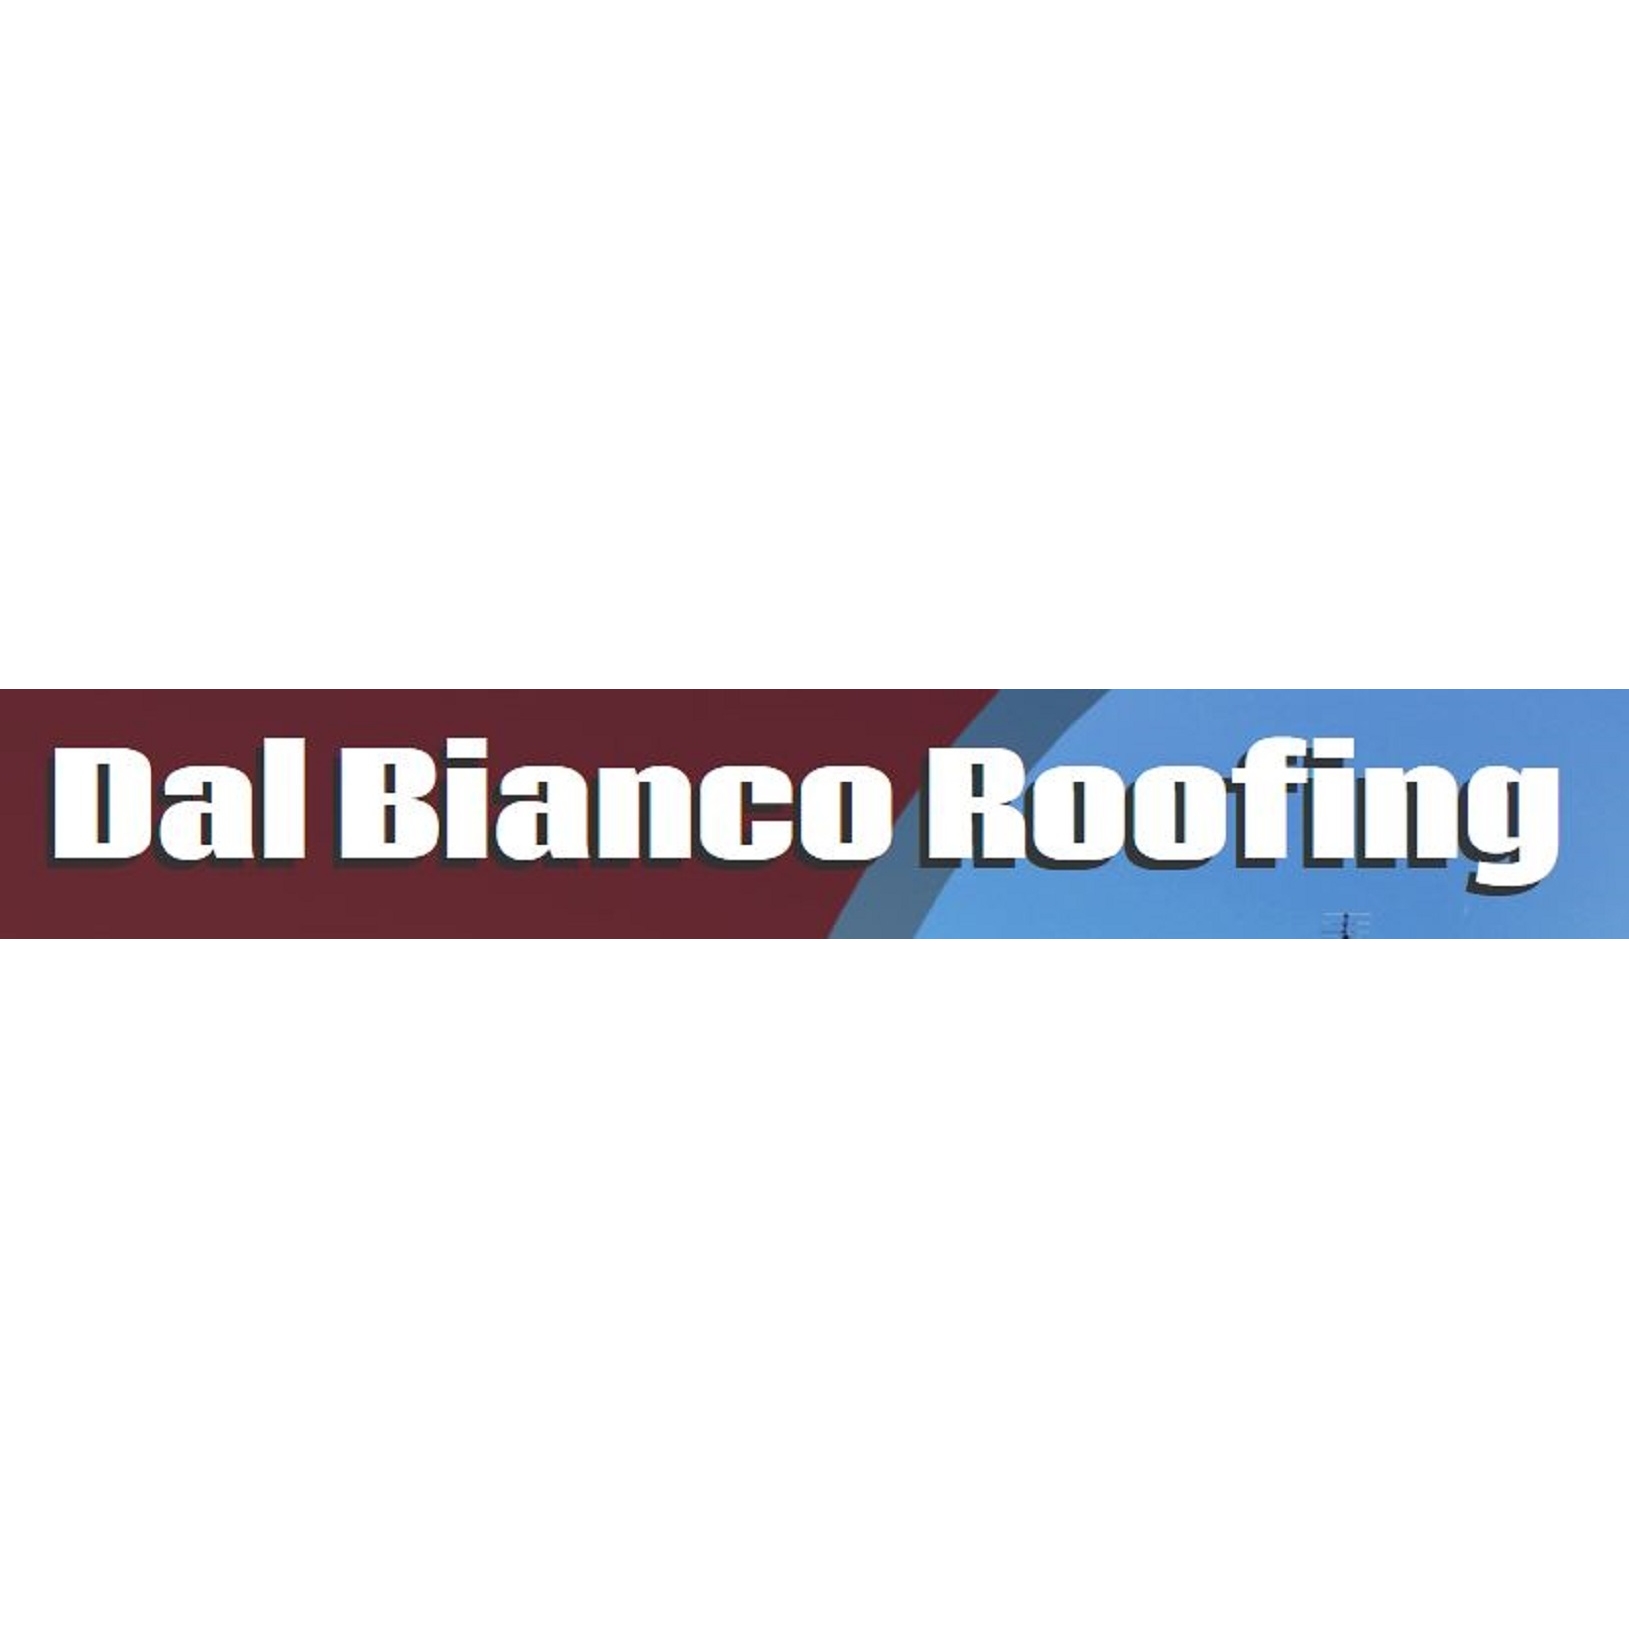 Dal Bianco Roofing Co - Munster, IN 46321 - (708)895-9595 | ShowMeLocal.com